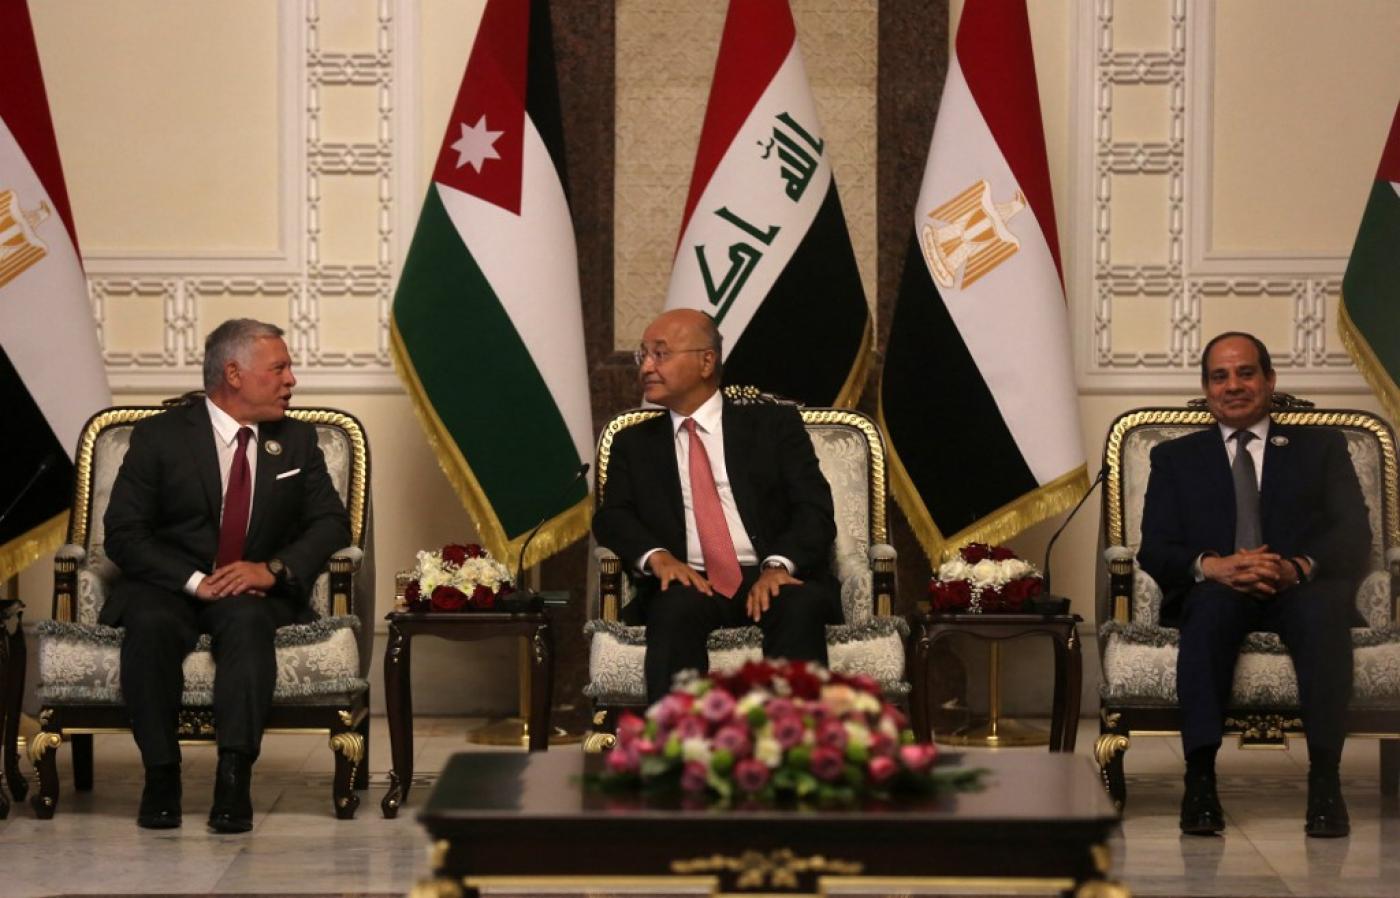 Report: Sisi's visit to Iraq highlights challenges for new Arab alliance